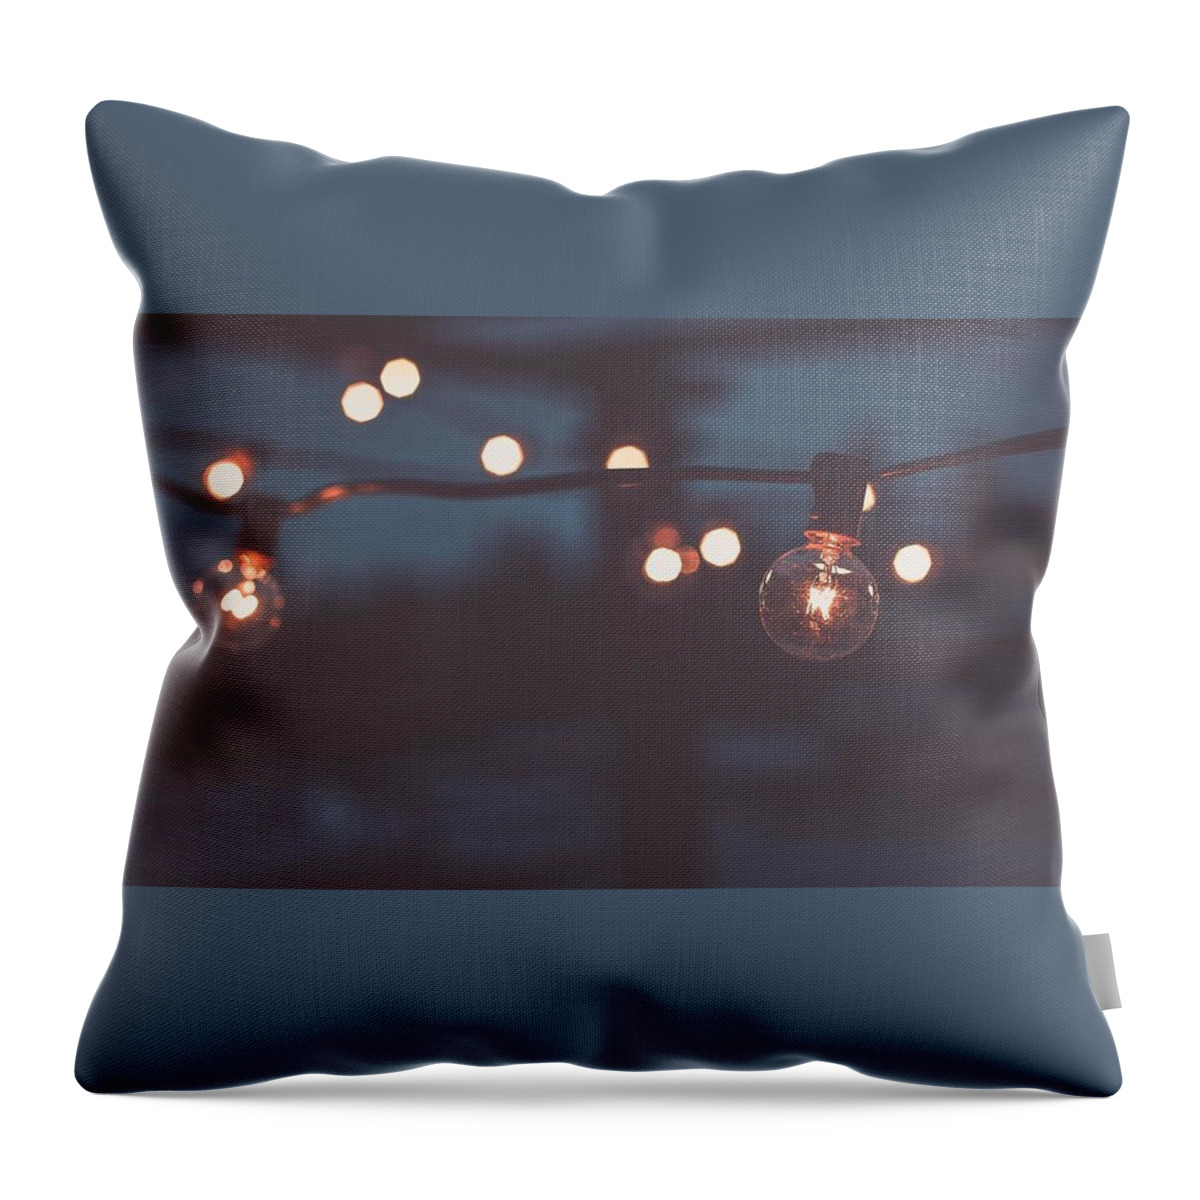 Light Bulb Throw Pillow featuring the photograph Light Bulb by Jackie Russo